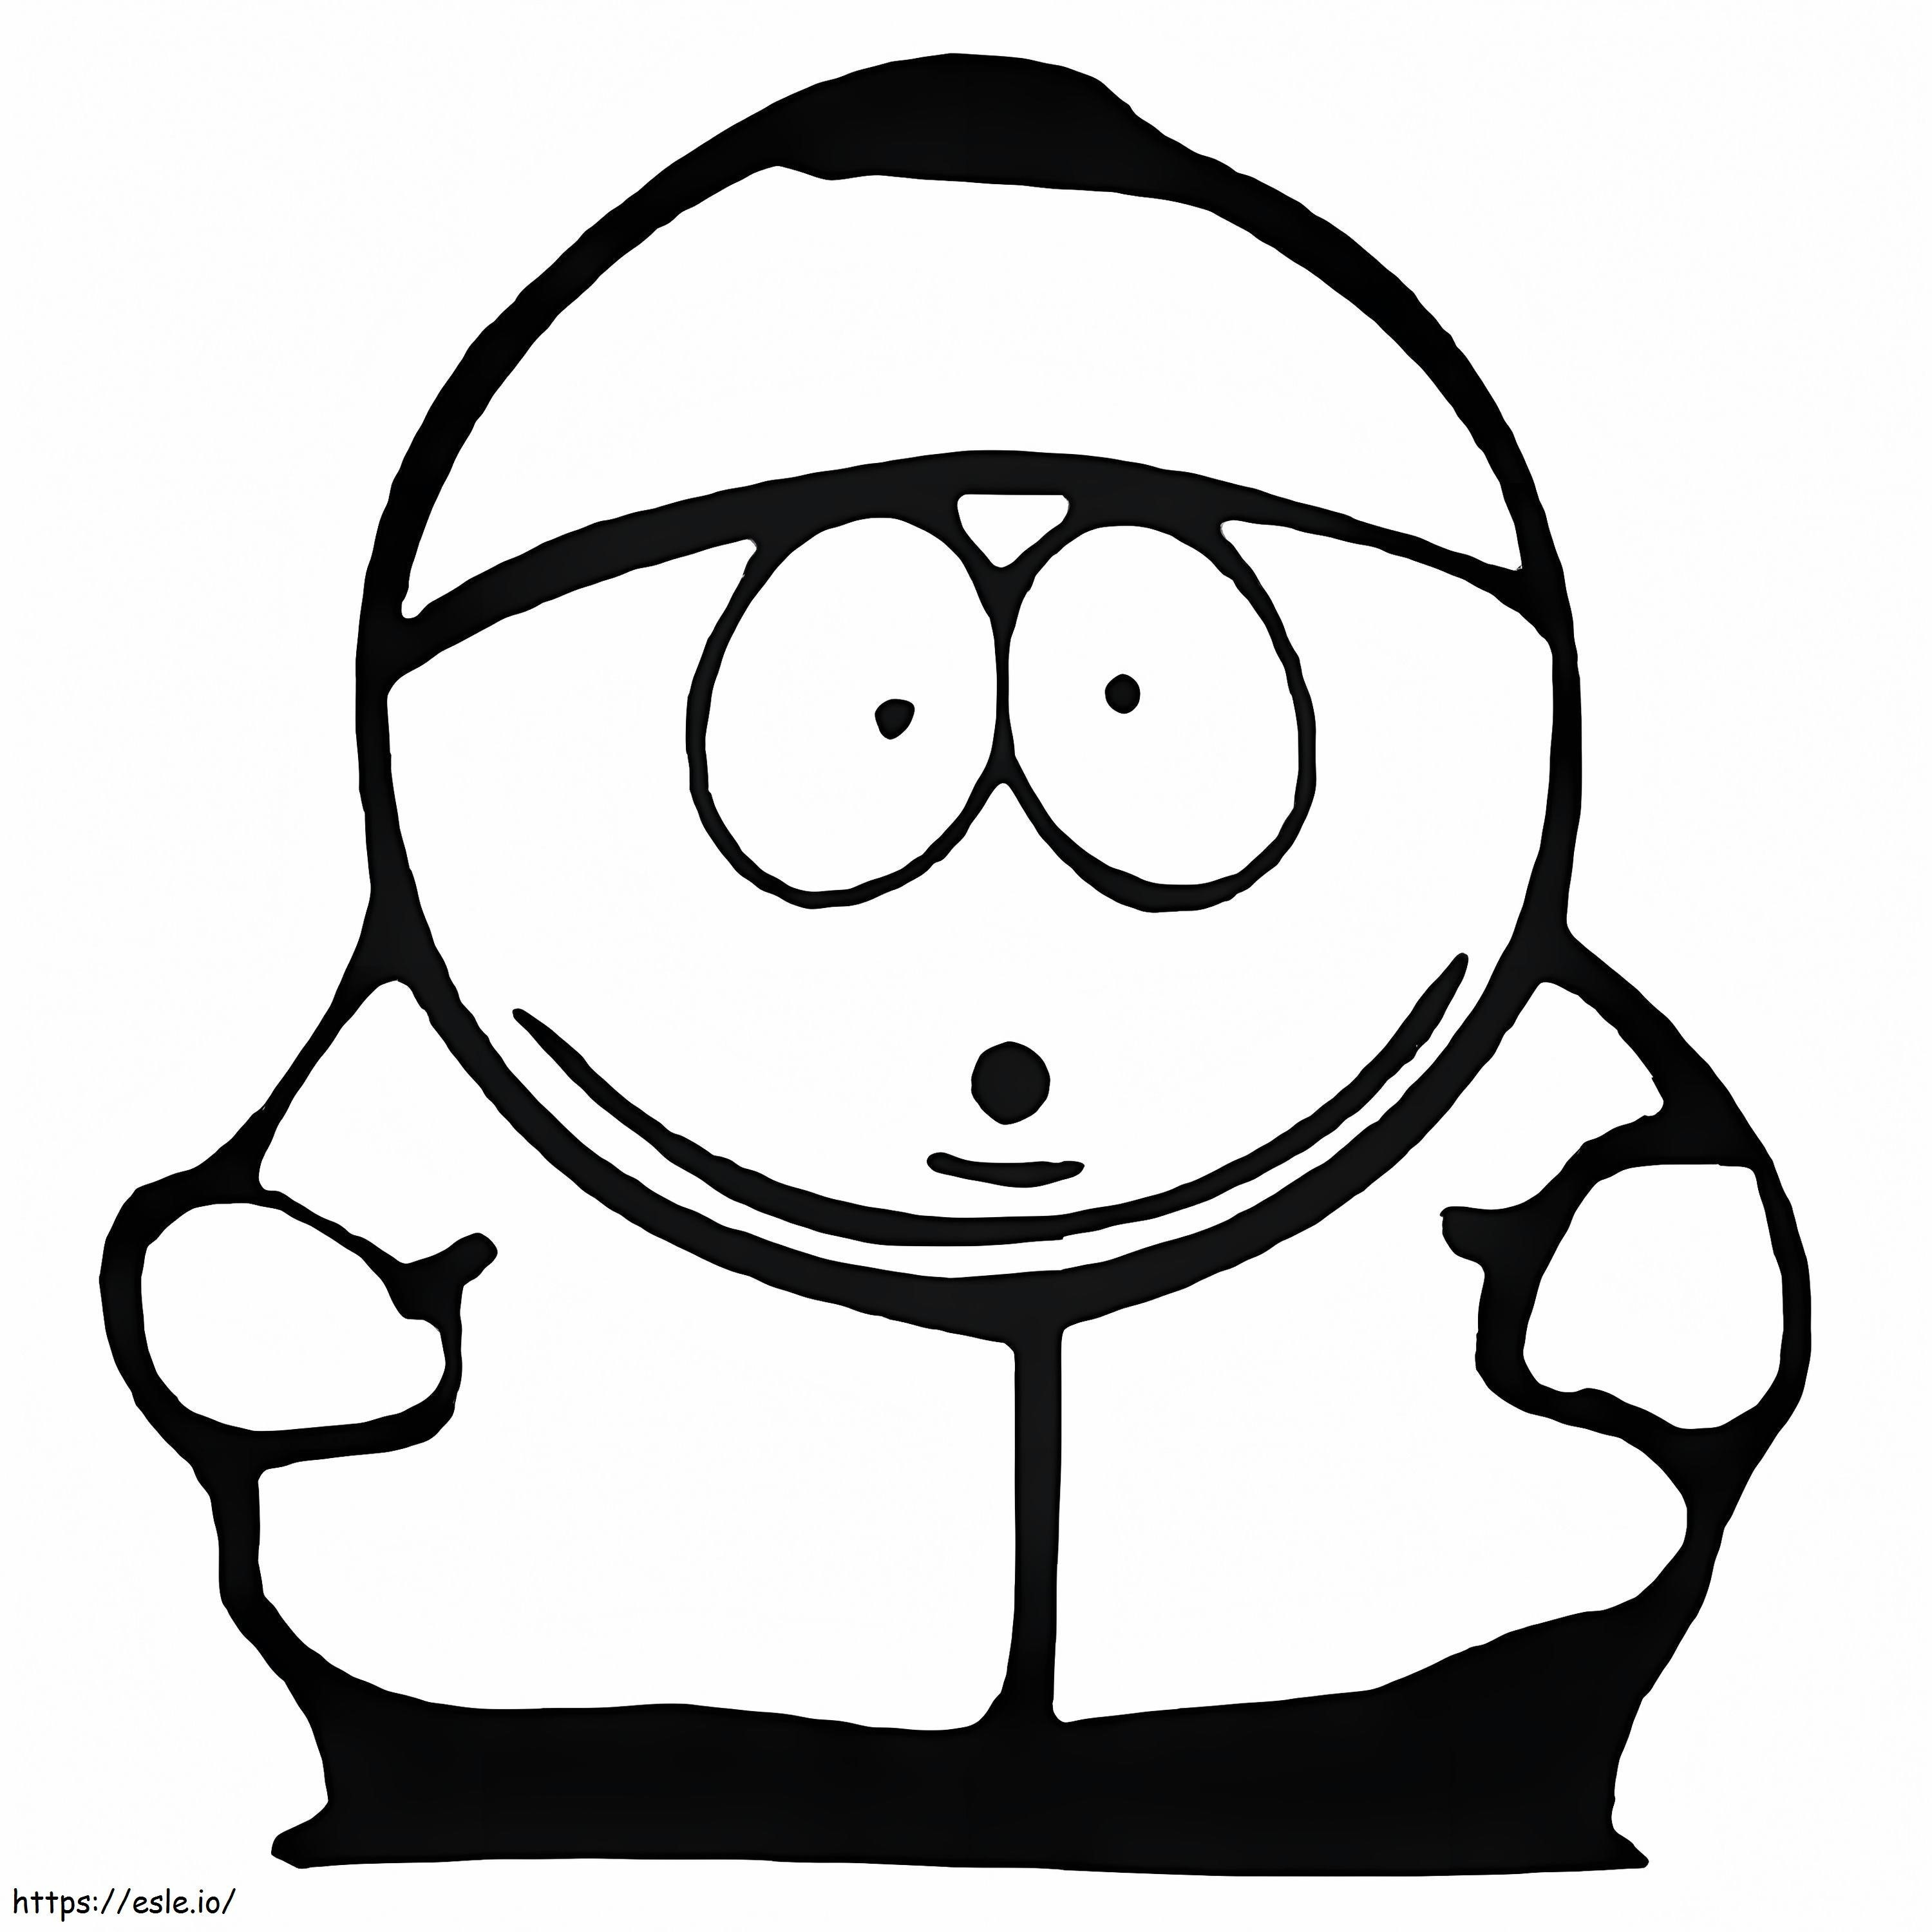 Funny Eric Cartman coloring page